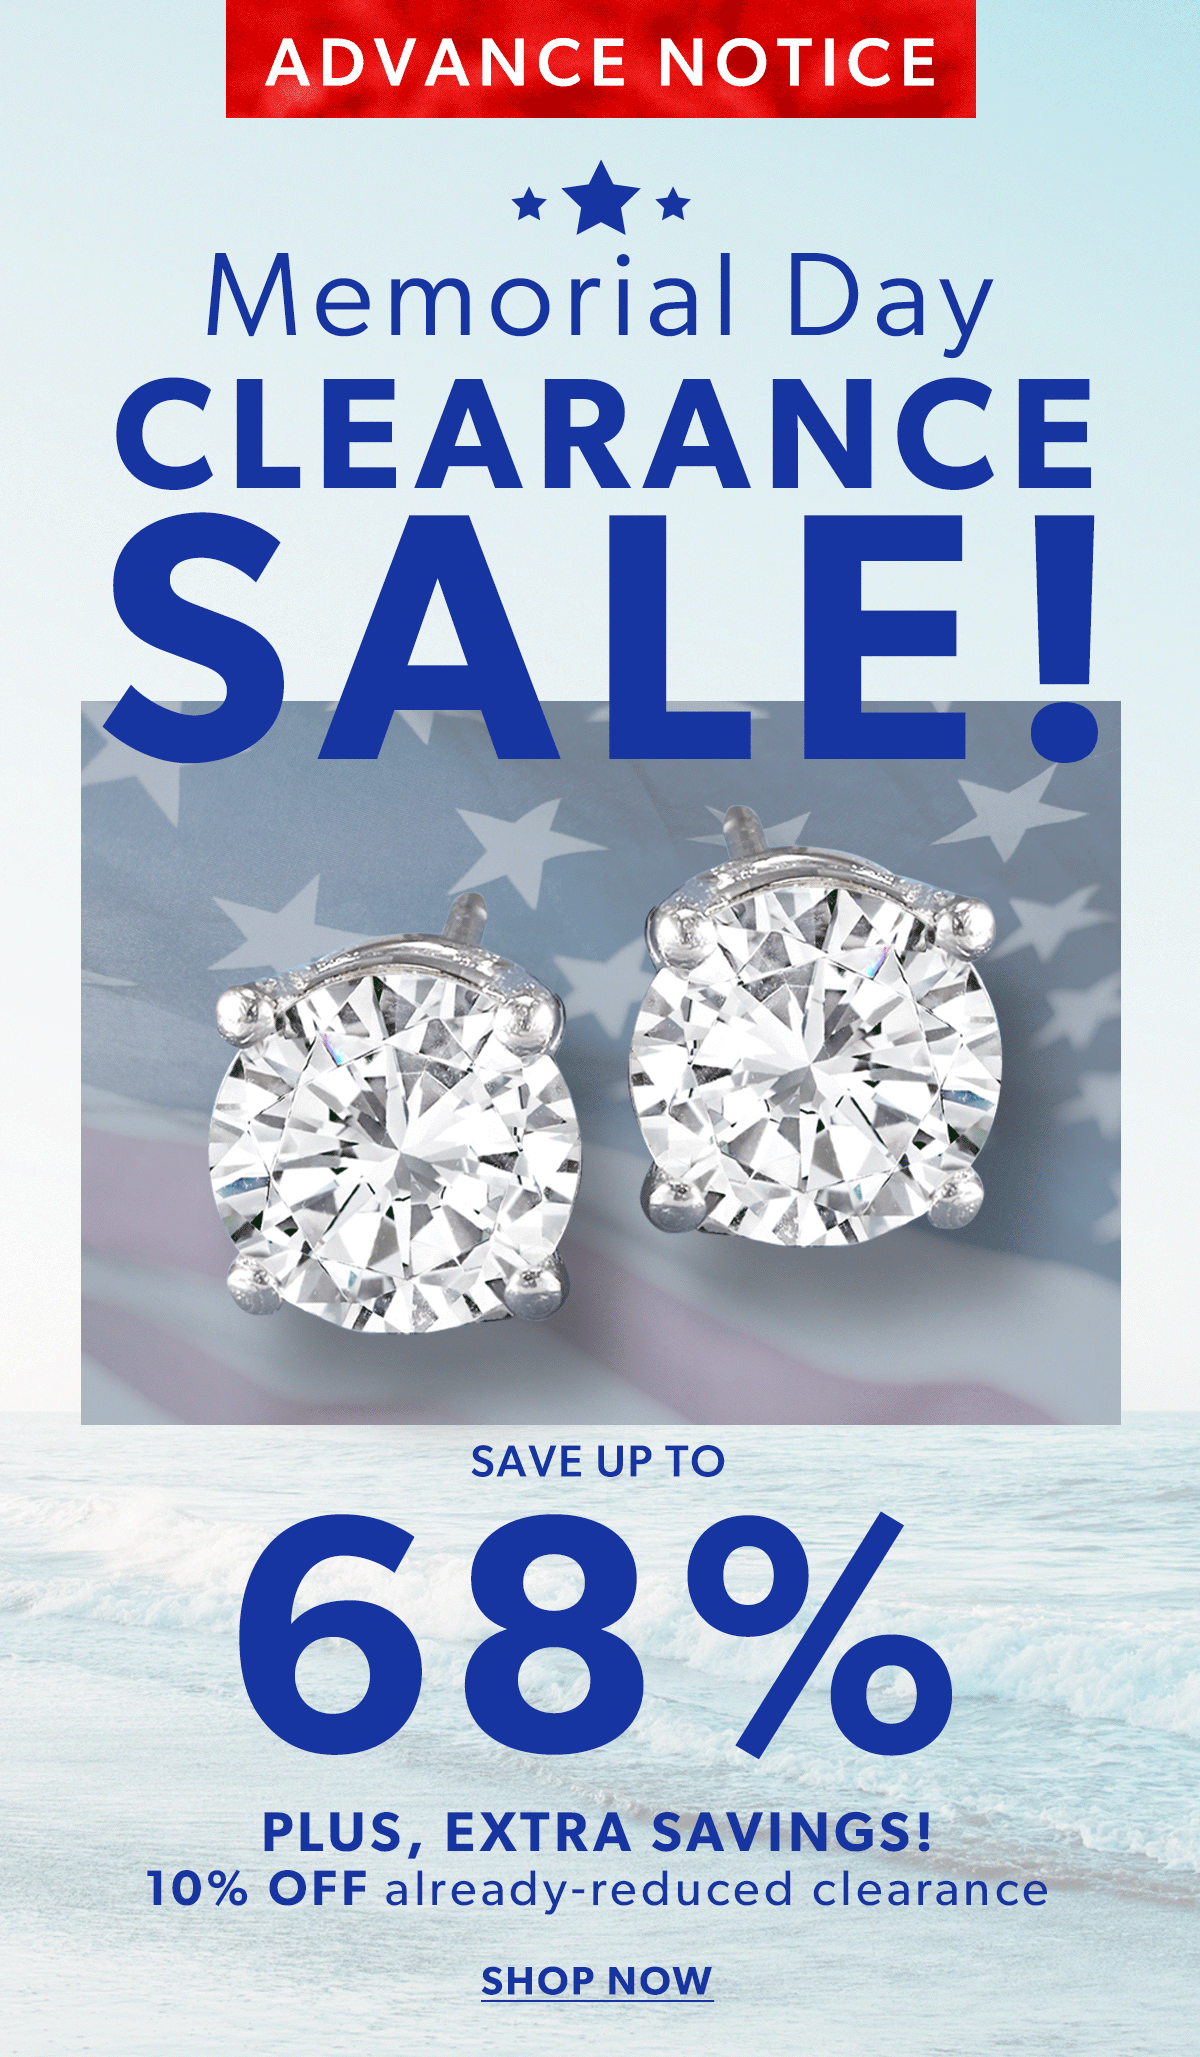 Advanced Notice. Memorial Day Clearance Sale!